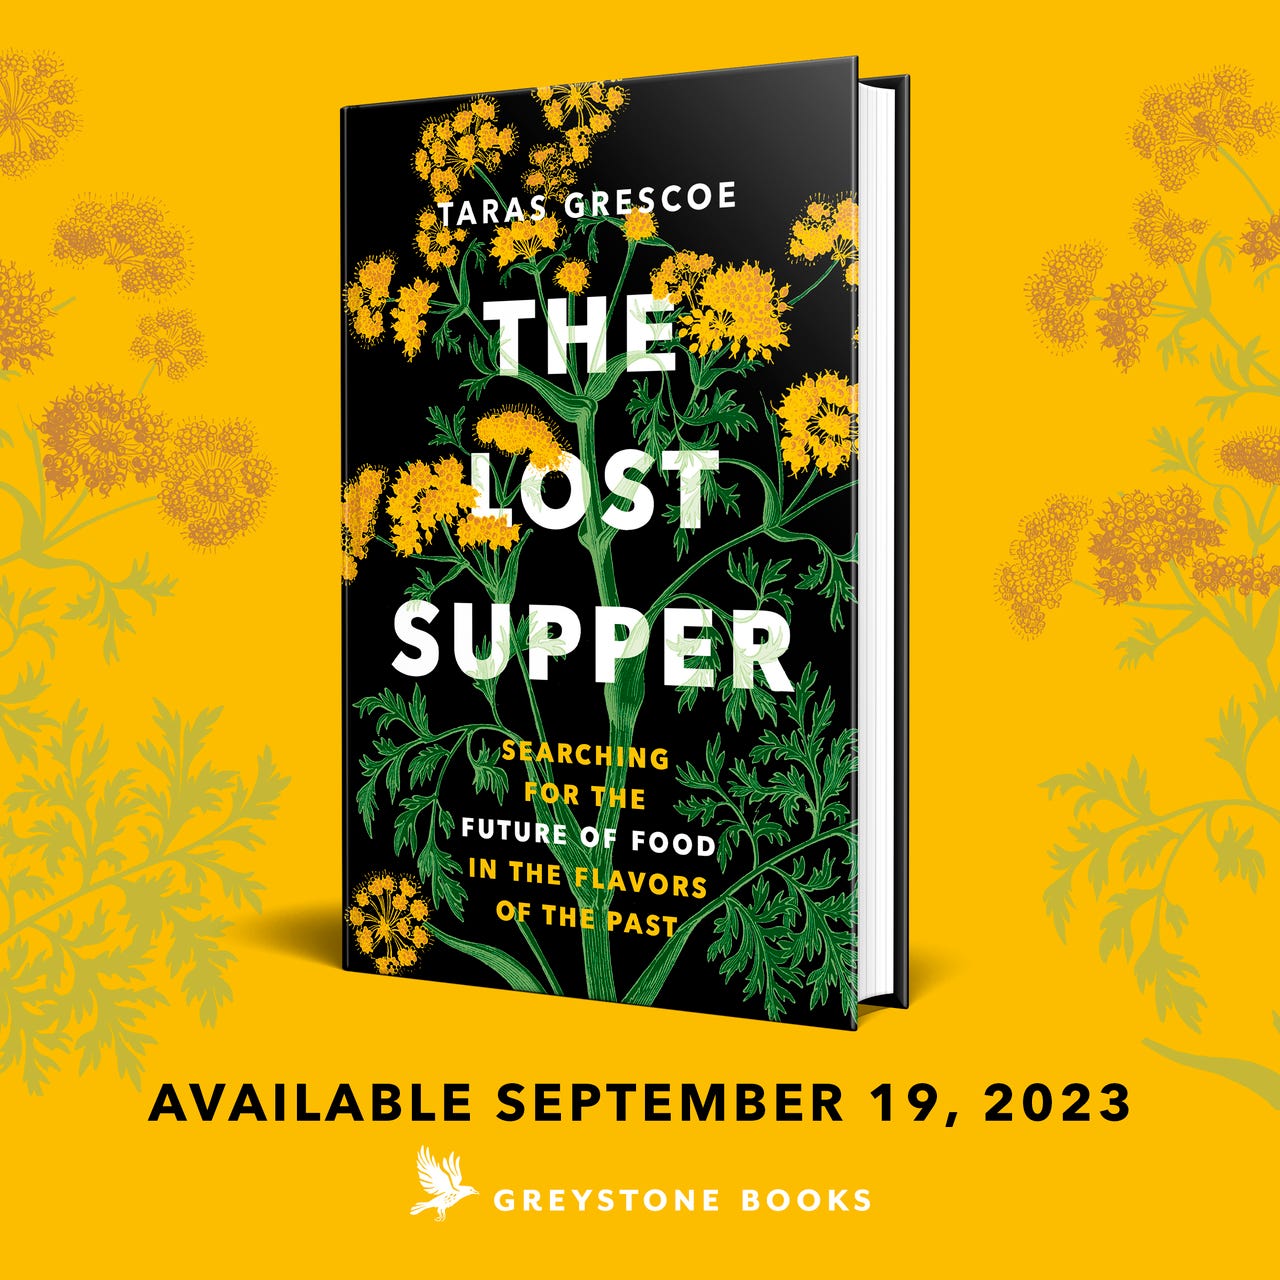 Artwork for The Lost Supper, from Taras Grescoe